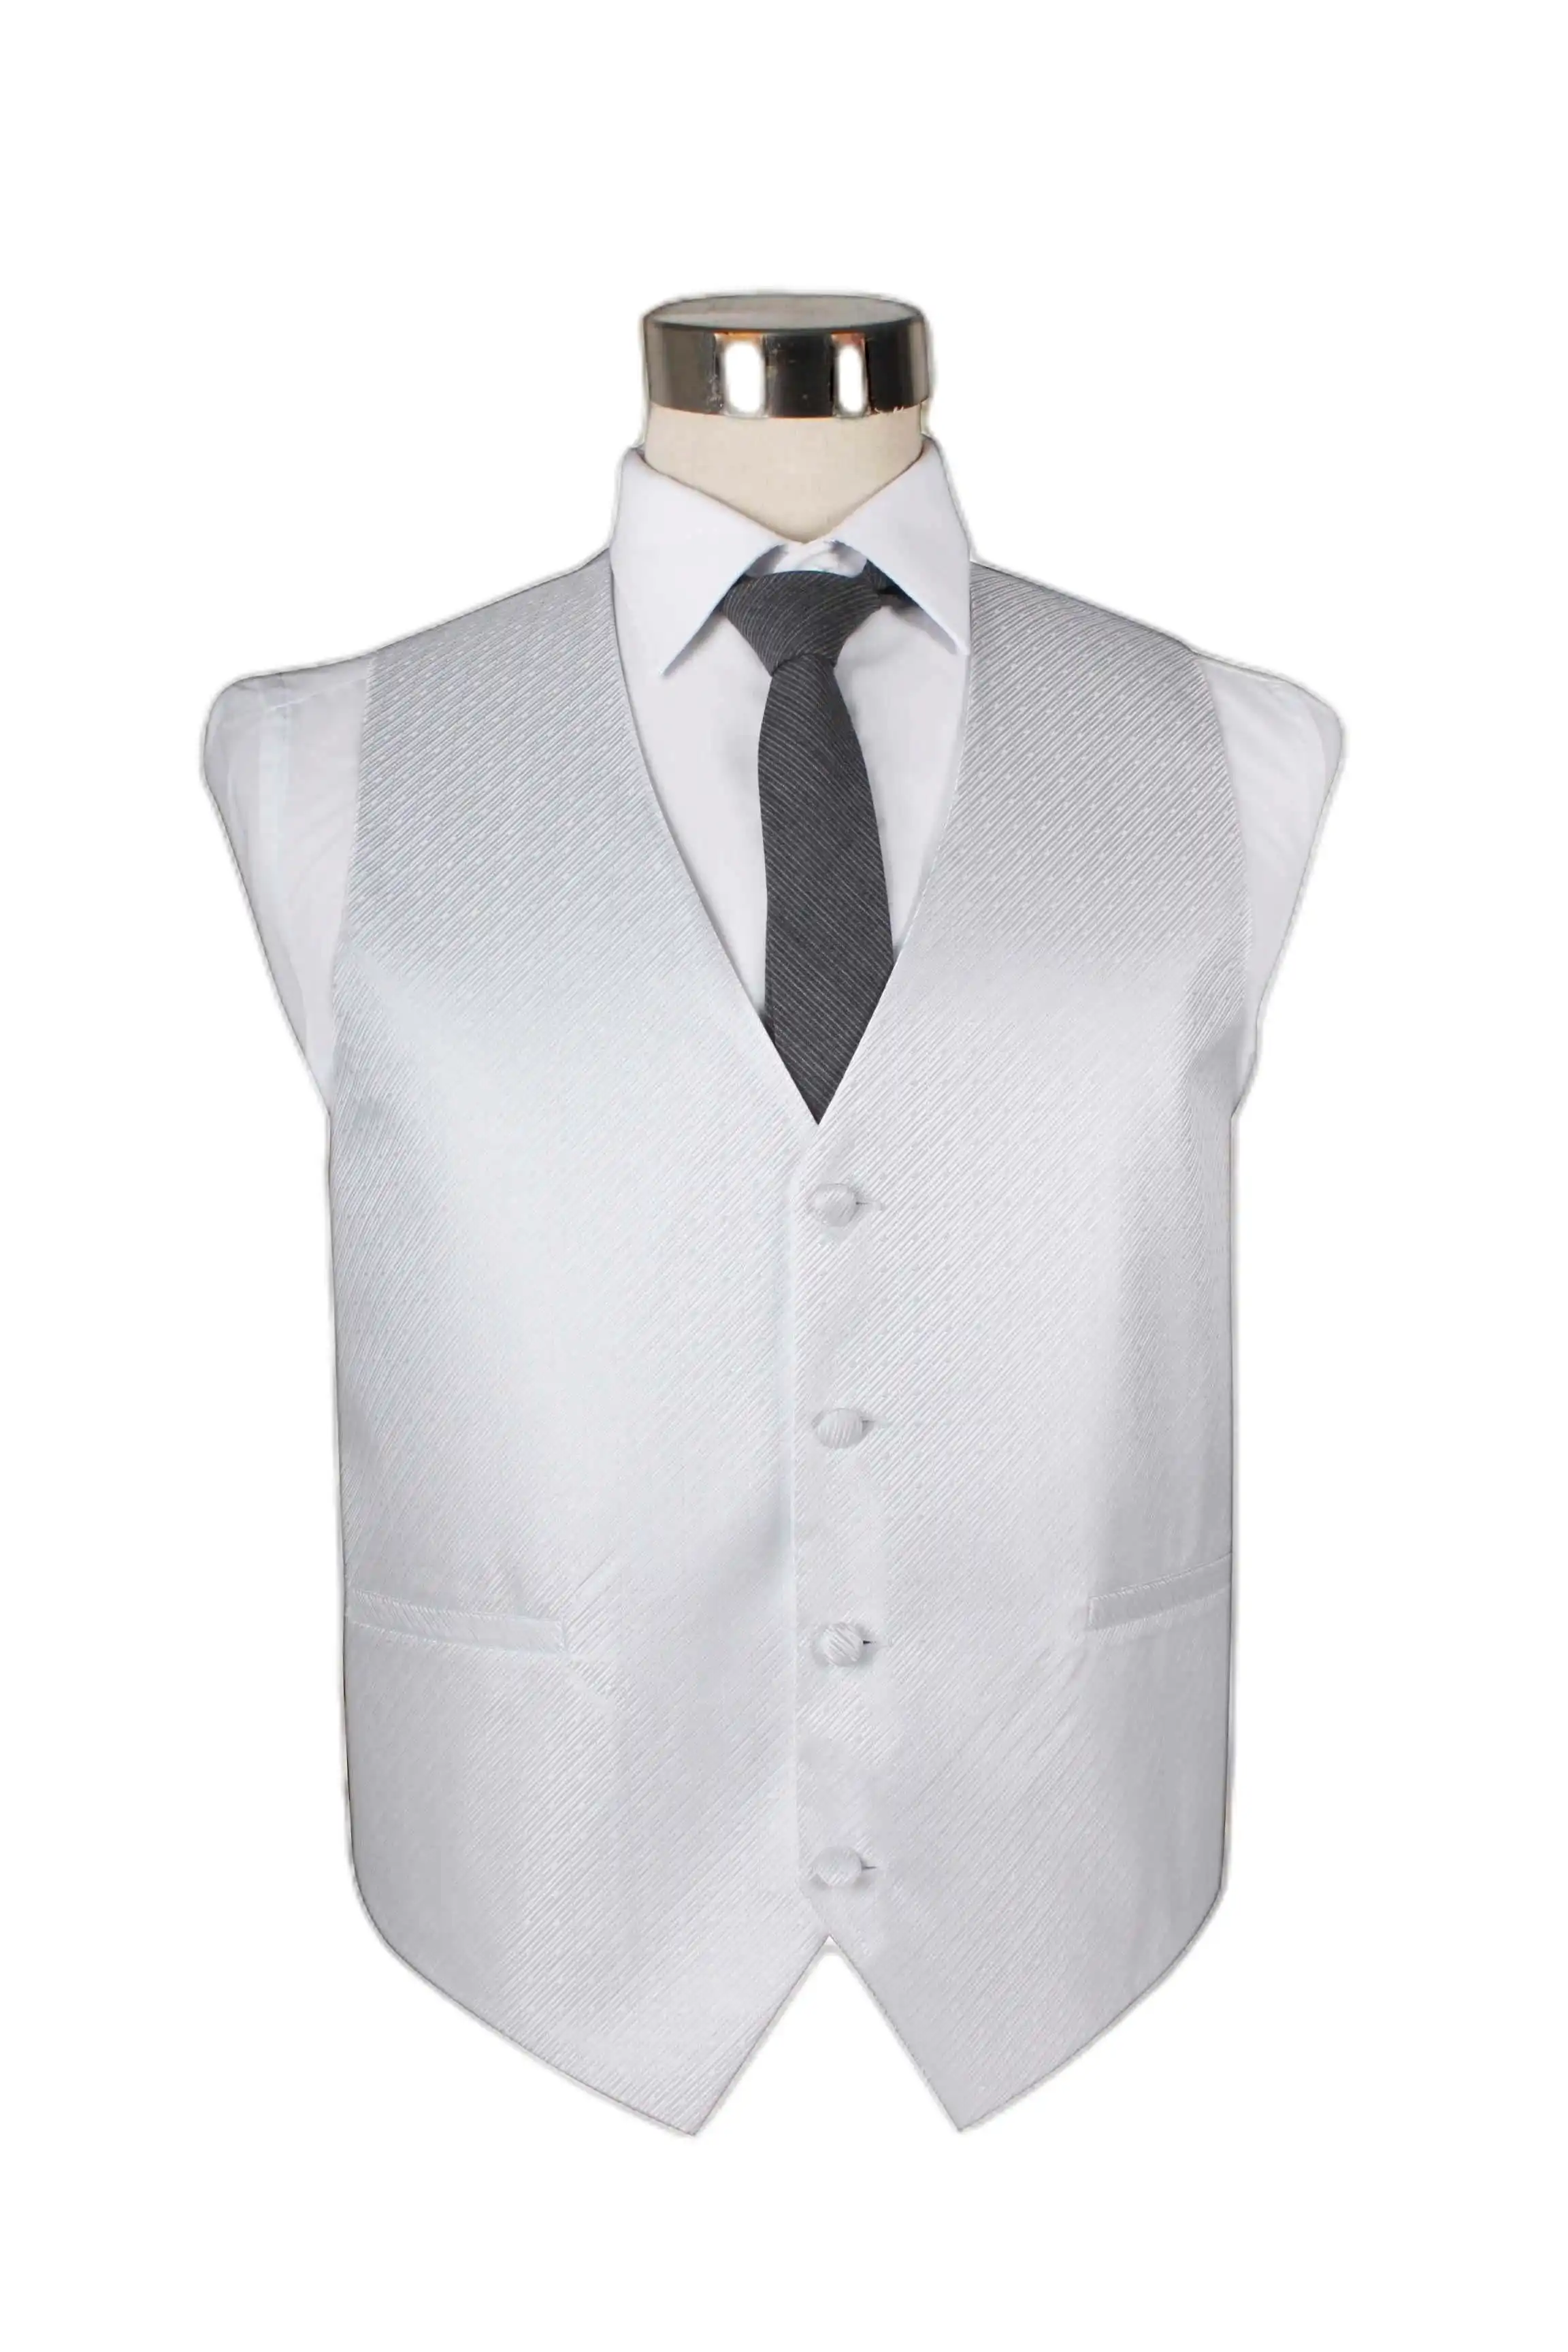 Mens White Pin Striped Patterned Vest Waistcoat